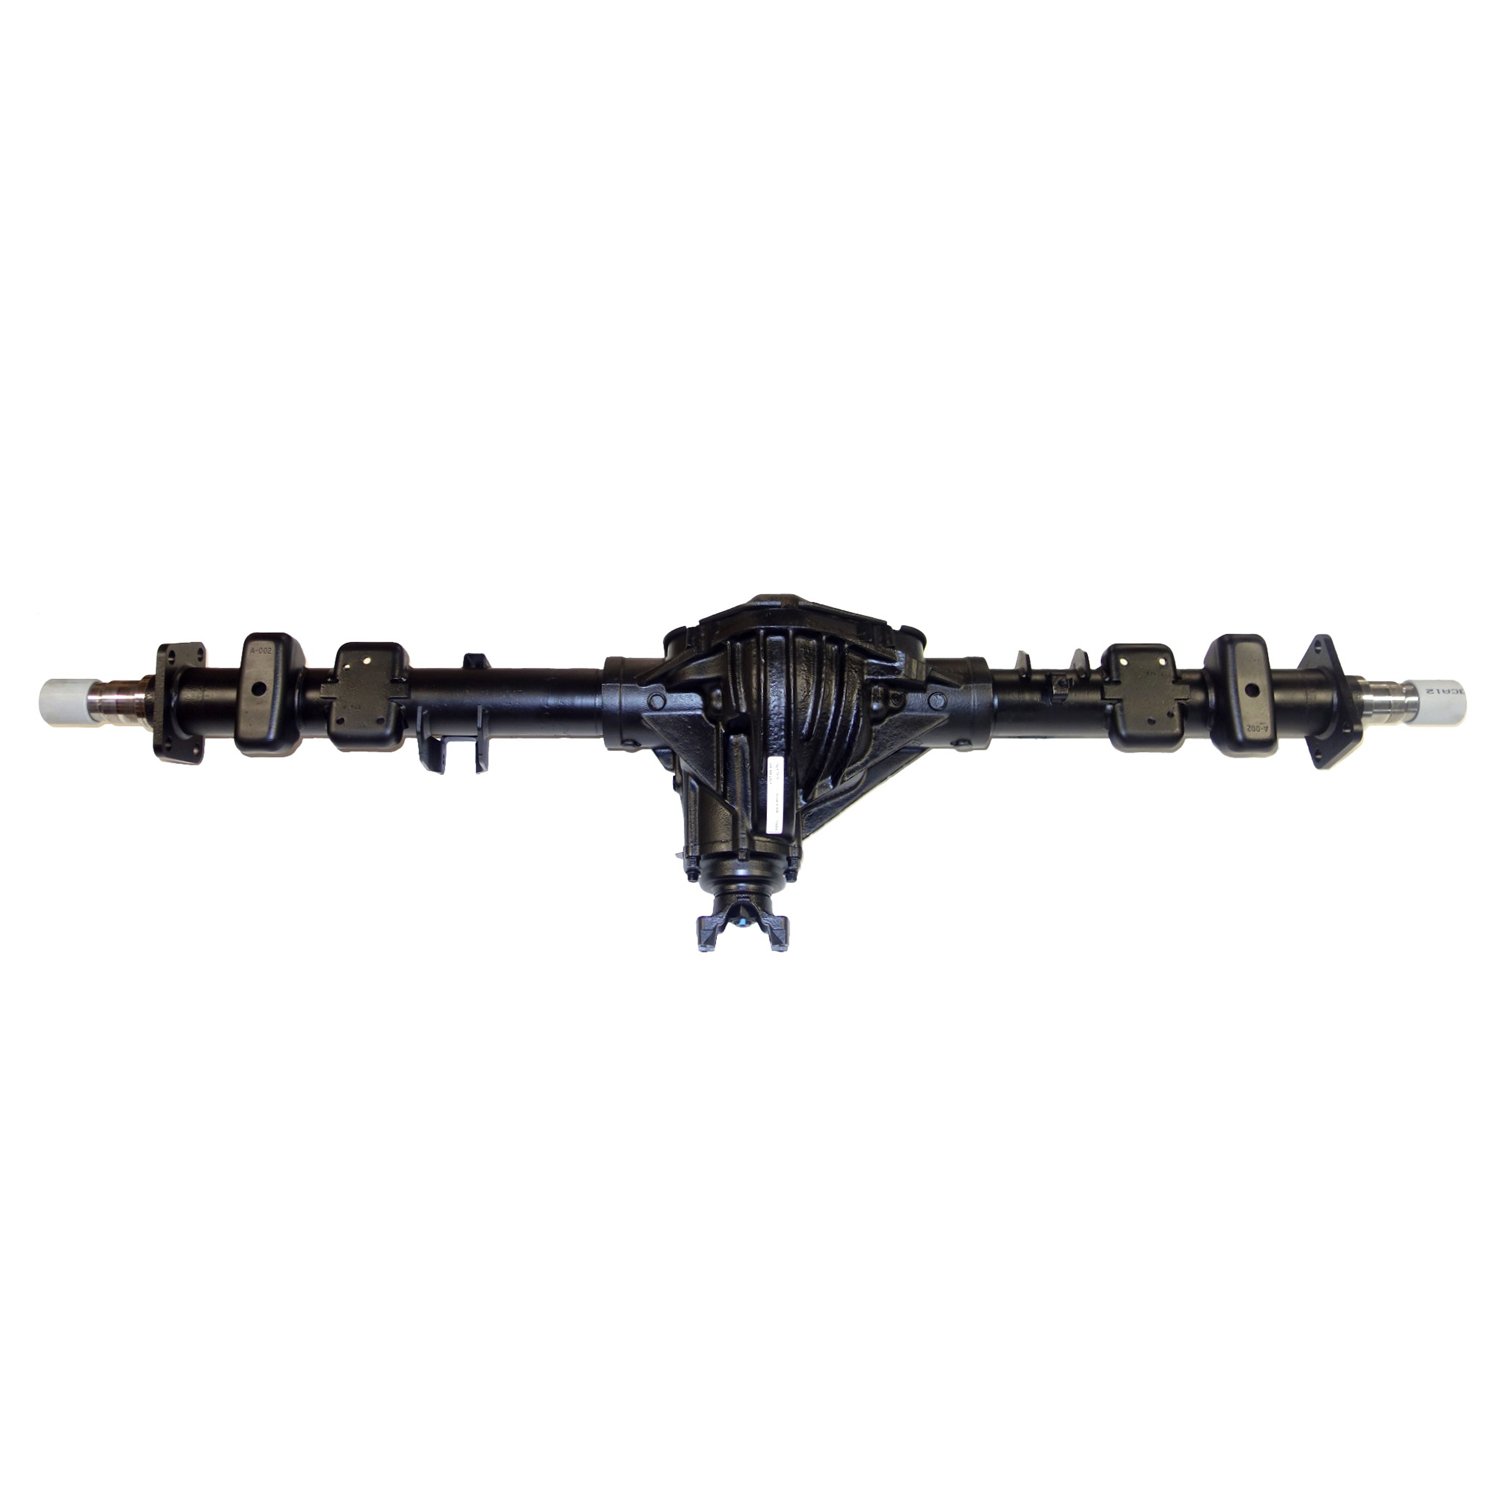 Remanufactured Axle Assy GM 14 Bolt Truck 90-00 GM 3500, 4.11 , DRW, Posi LSD, Wide Track